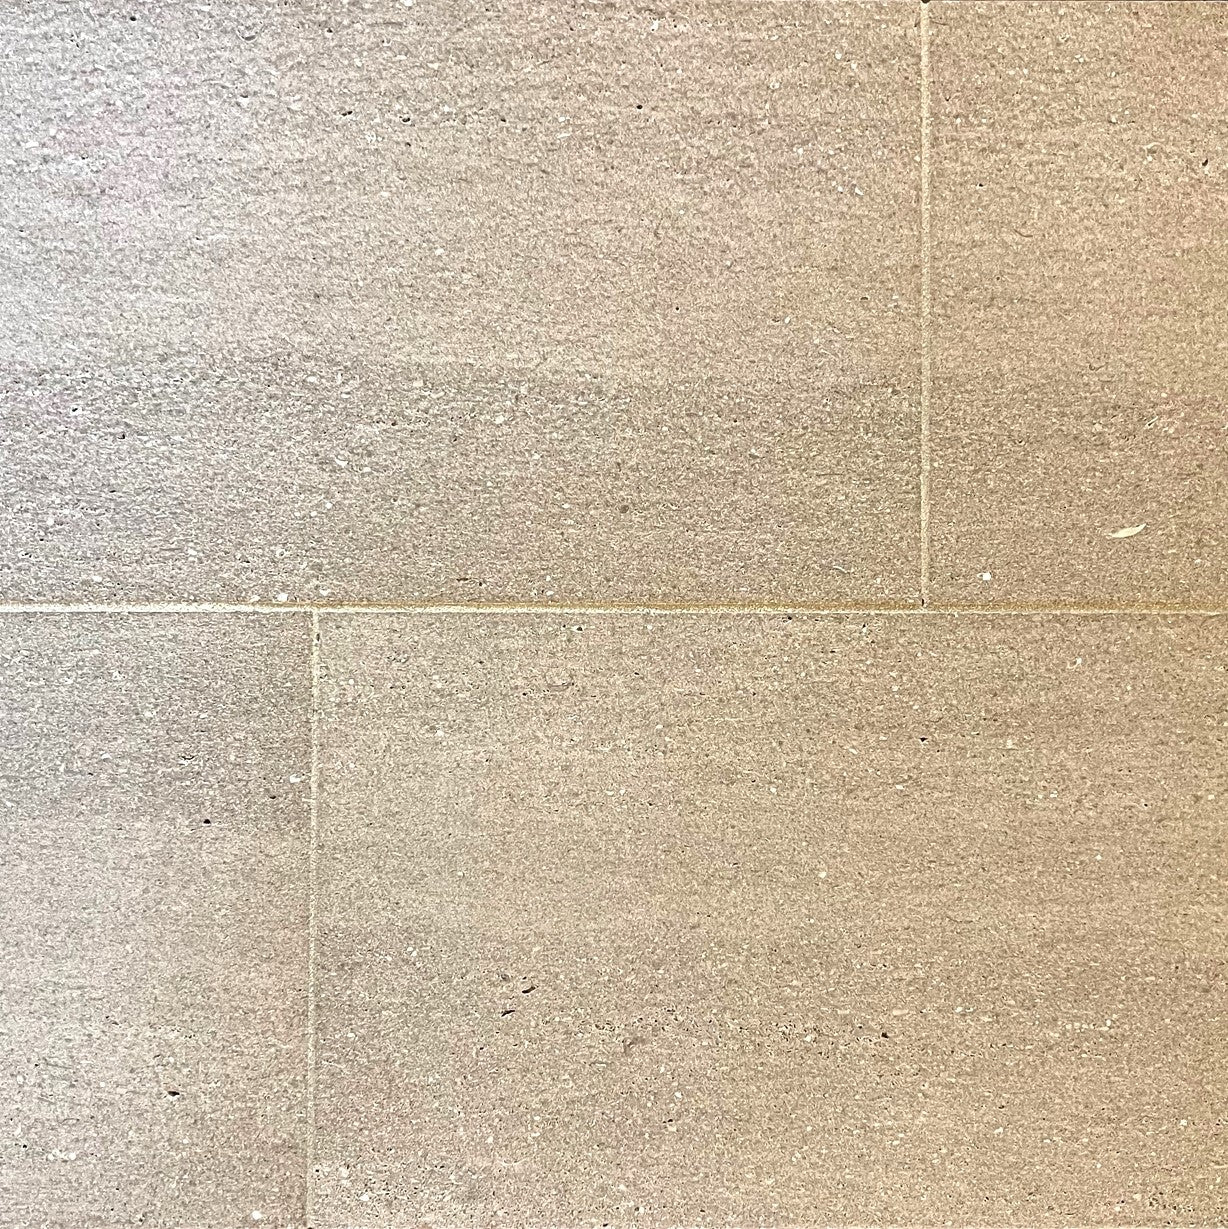 american limestone indiana versailles pattern interior natural stone tile for floor and wall made in united states distributed by surface group international